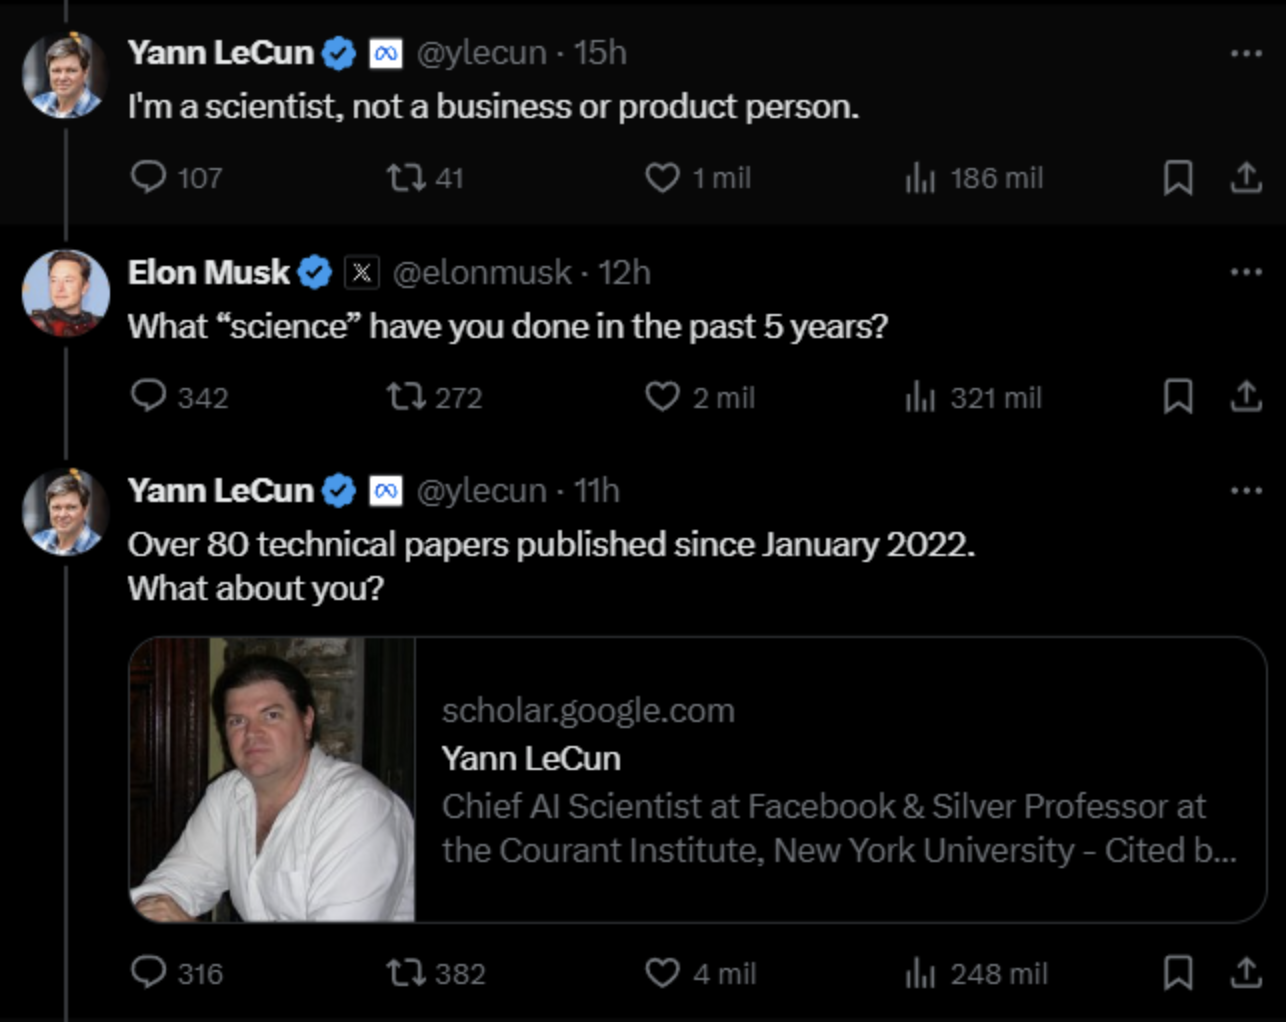 screenshot - O Yann LeCun 15h I'm a scientist, not a business or product person. 107 13 41 1 mil Elon Musk 12h What "science" have you done in the past 5 years? 342 13272 22 mil Yann LeCun 11h ill 186 mil 1 ahl 321 mil Over 80 technical papers published s